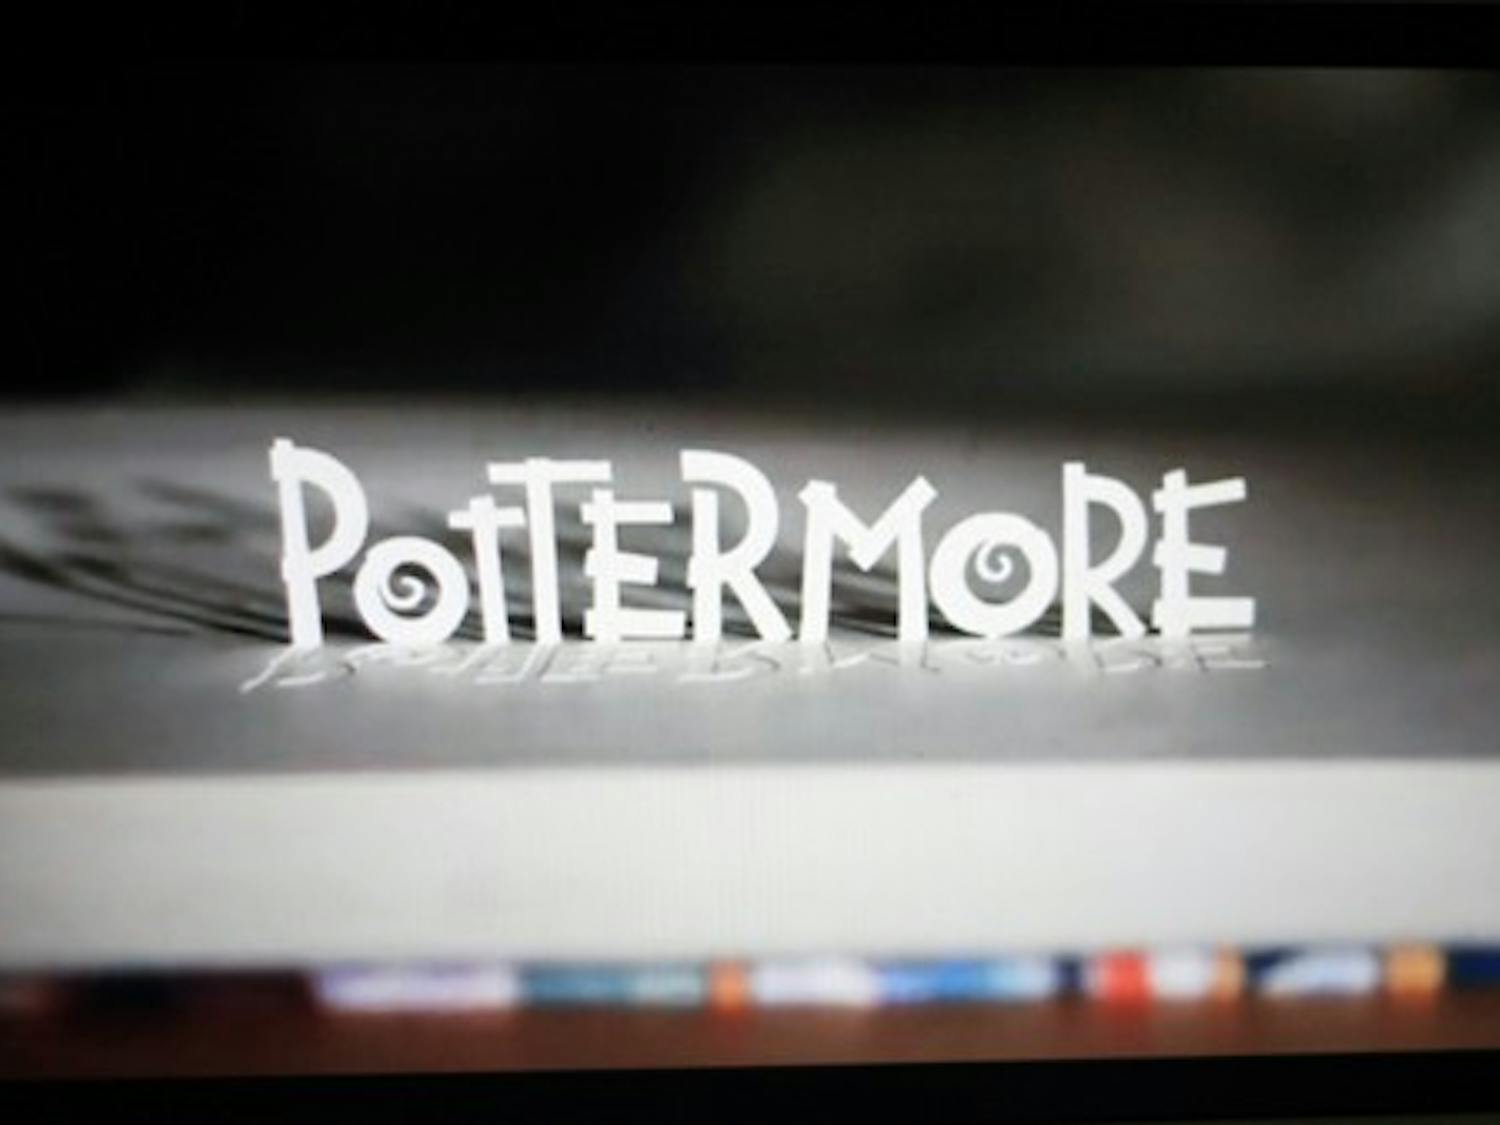 HOGWARTS COMMUNITY: Pottermore online is J.K. Rowling's newest creation for Harry Potter fans now that the seven books and eight movies have come to an end. The website allows more exploration of the Harry Potter series and social networking between fans. (Photo by Lillian Reid)